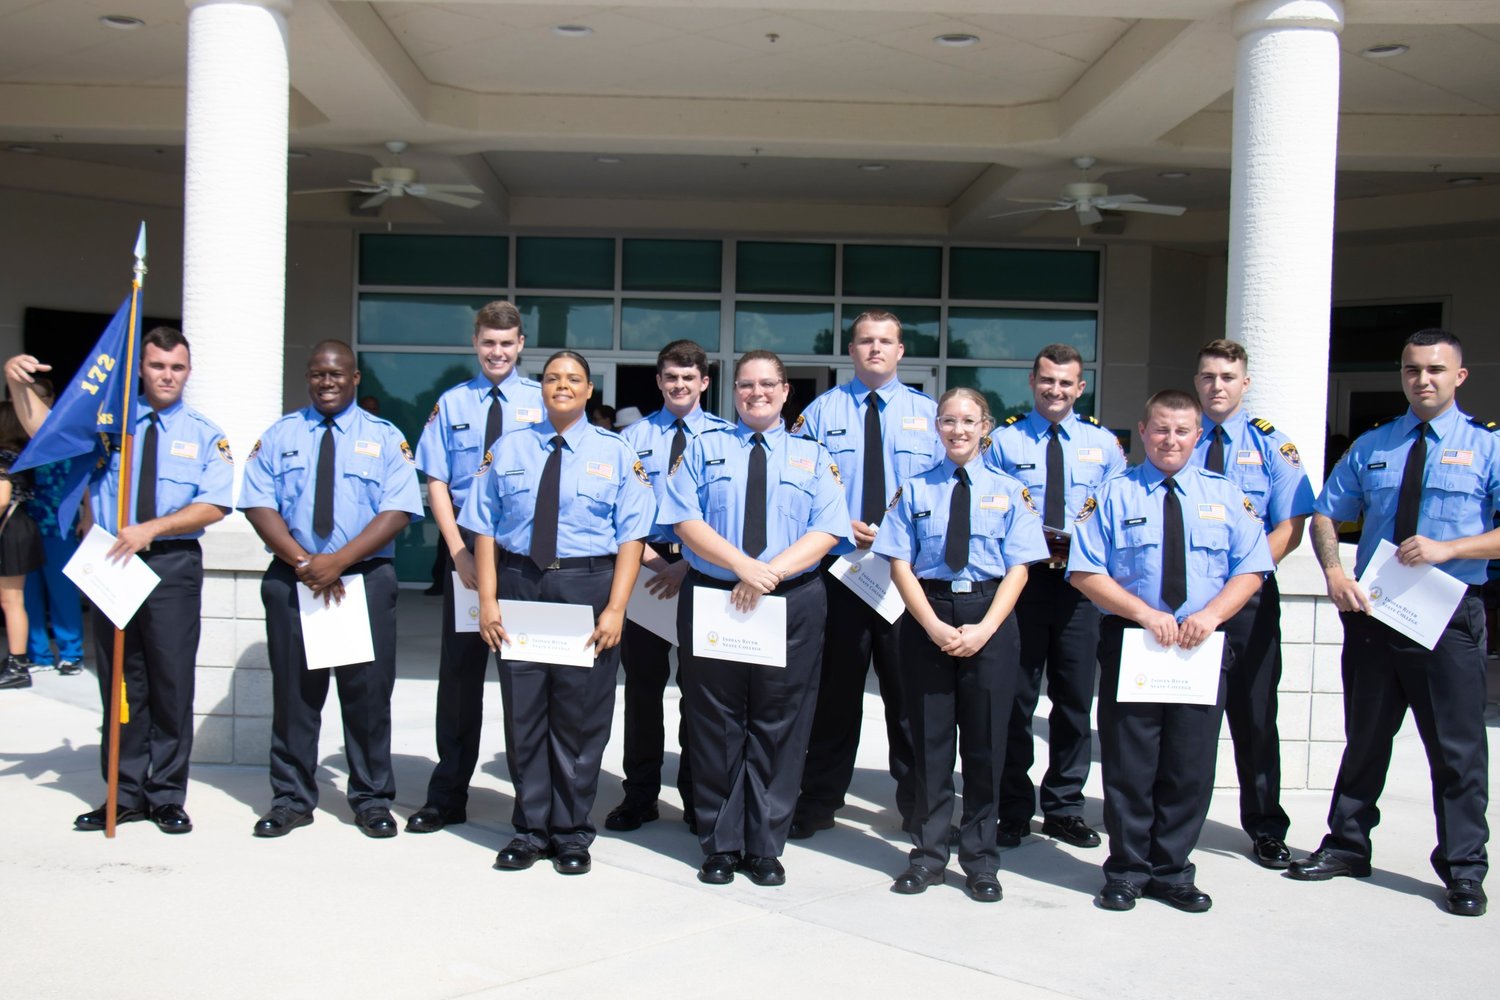 We want to take a moment to congratulate the graduating Correction Academy personnel from Class #172.